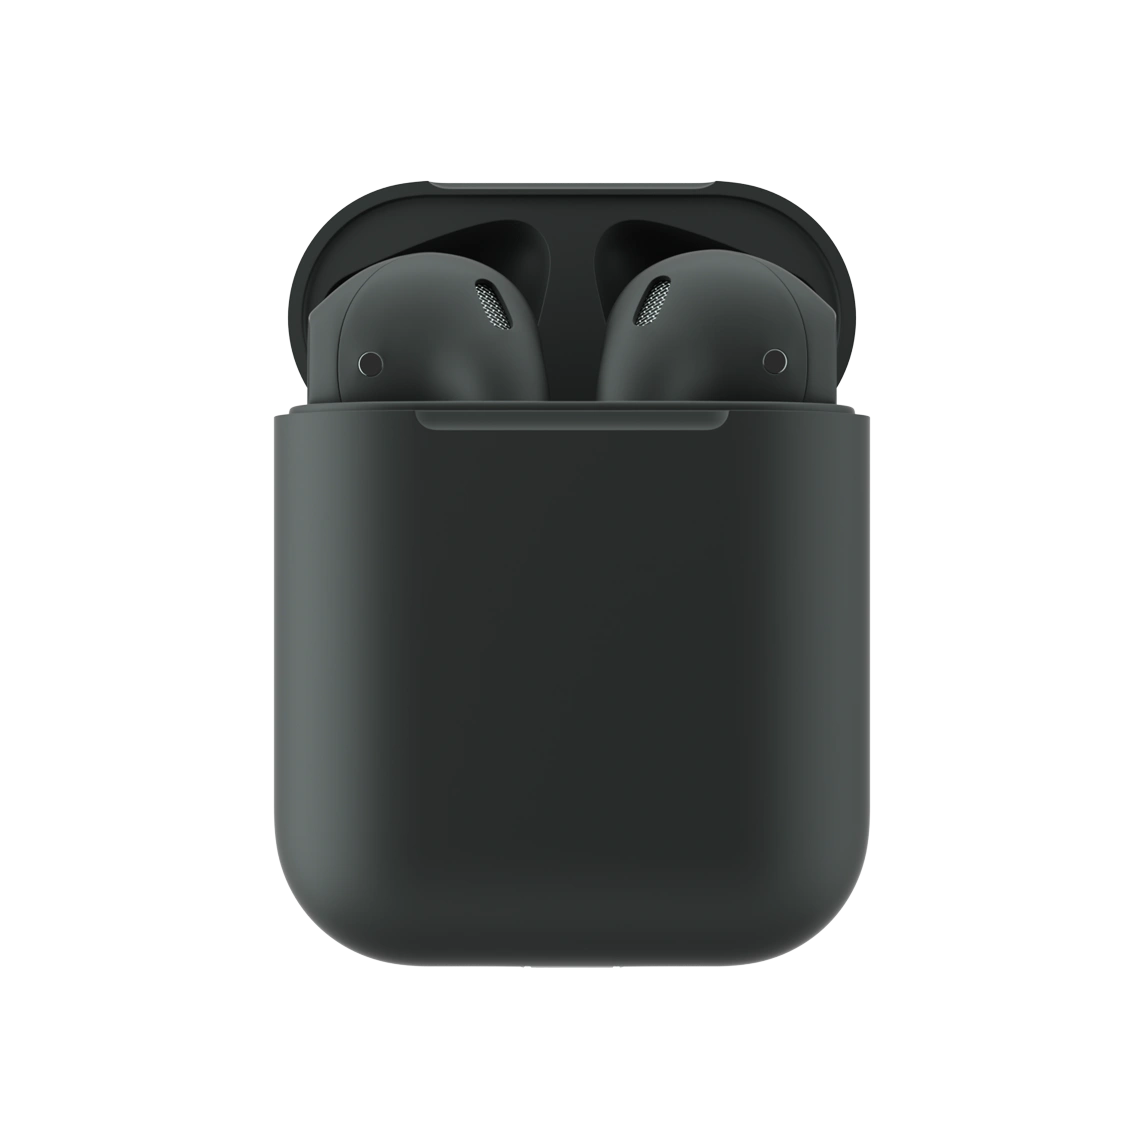 Craftby Merlin Apple Airpods 2nd Generation